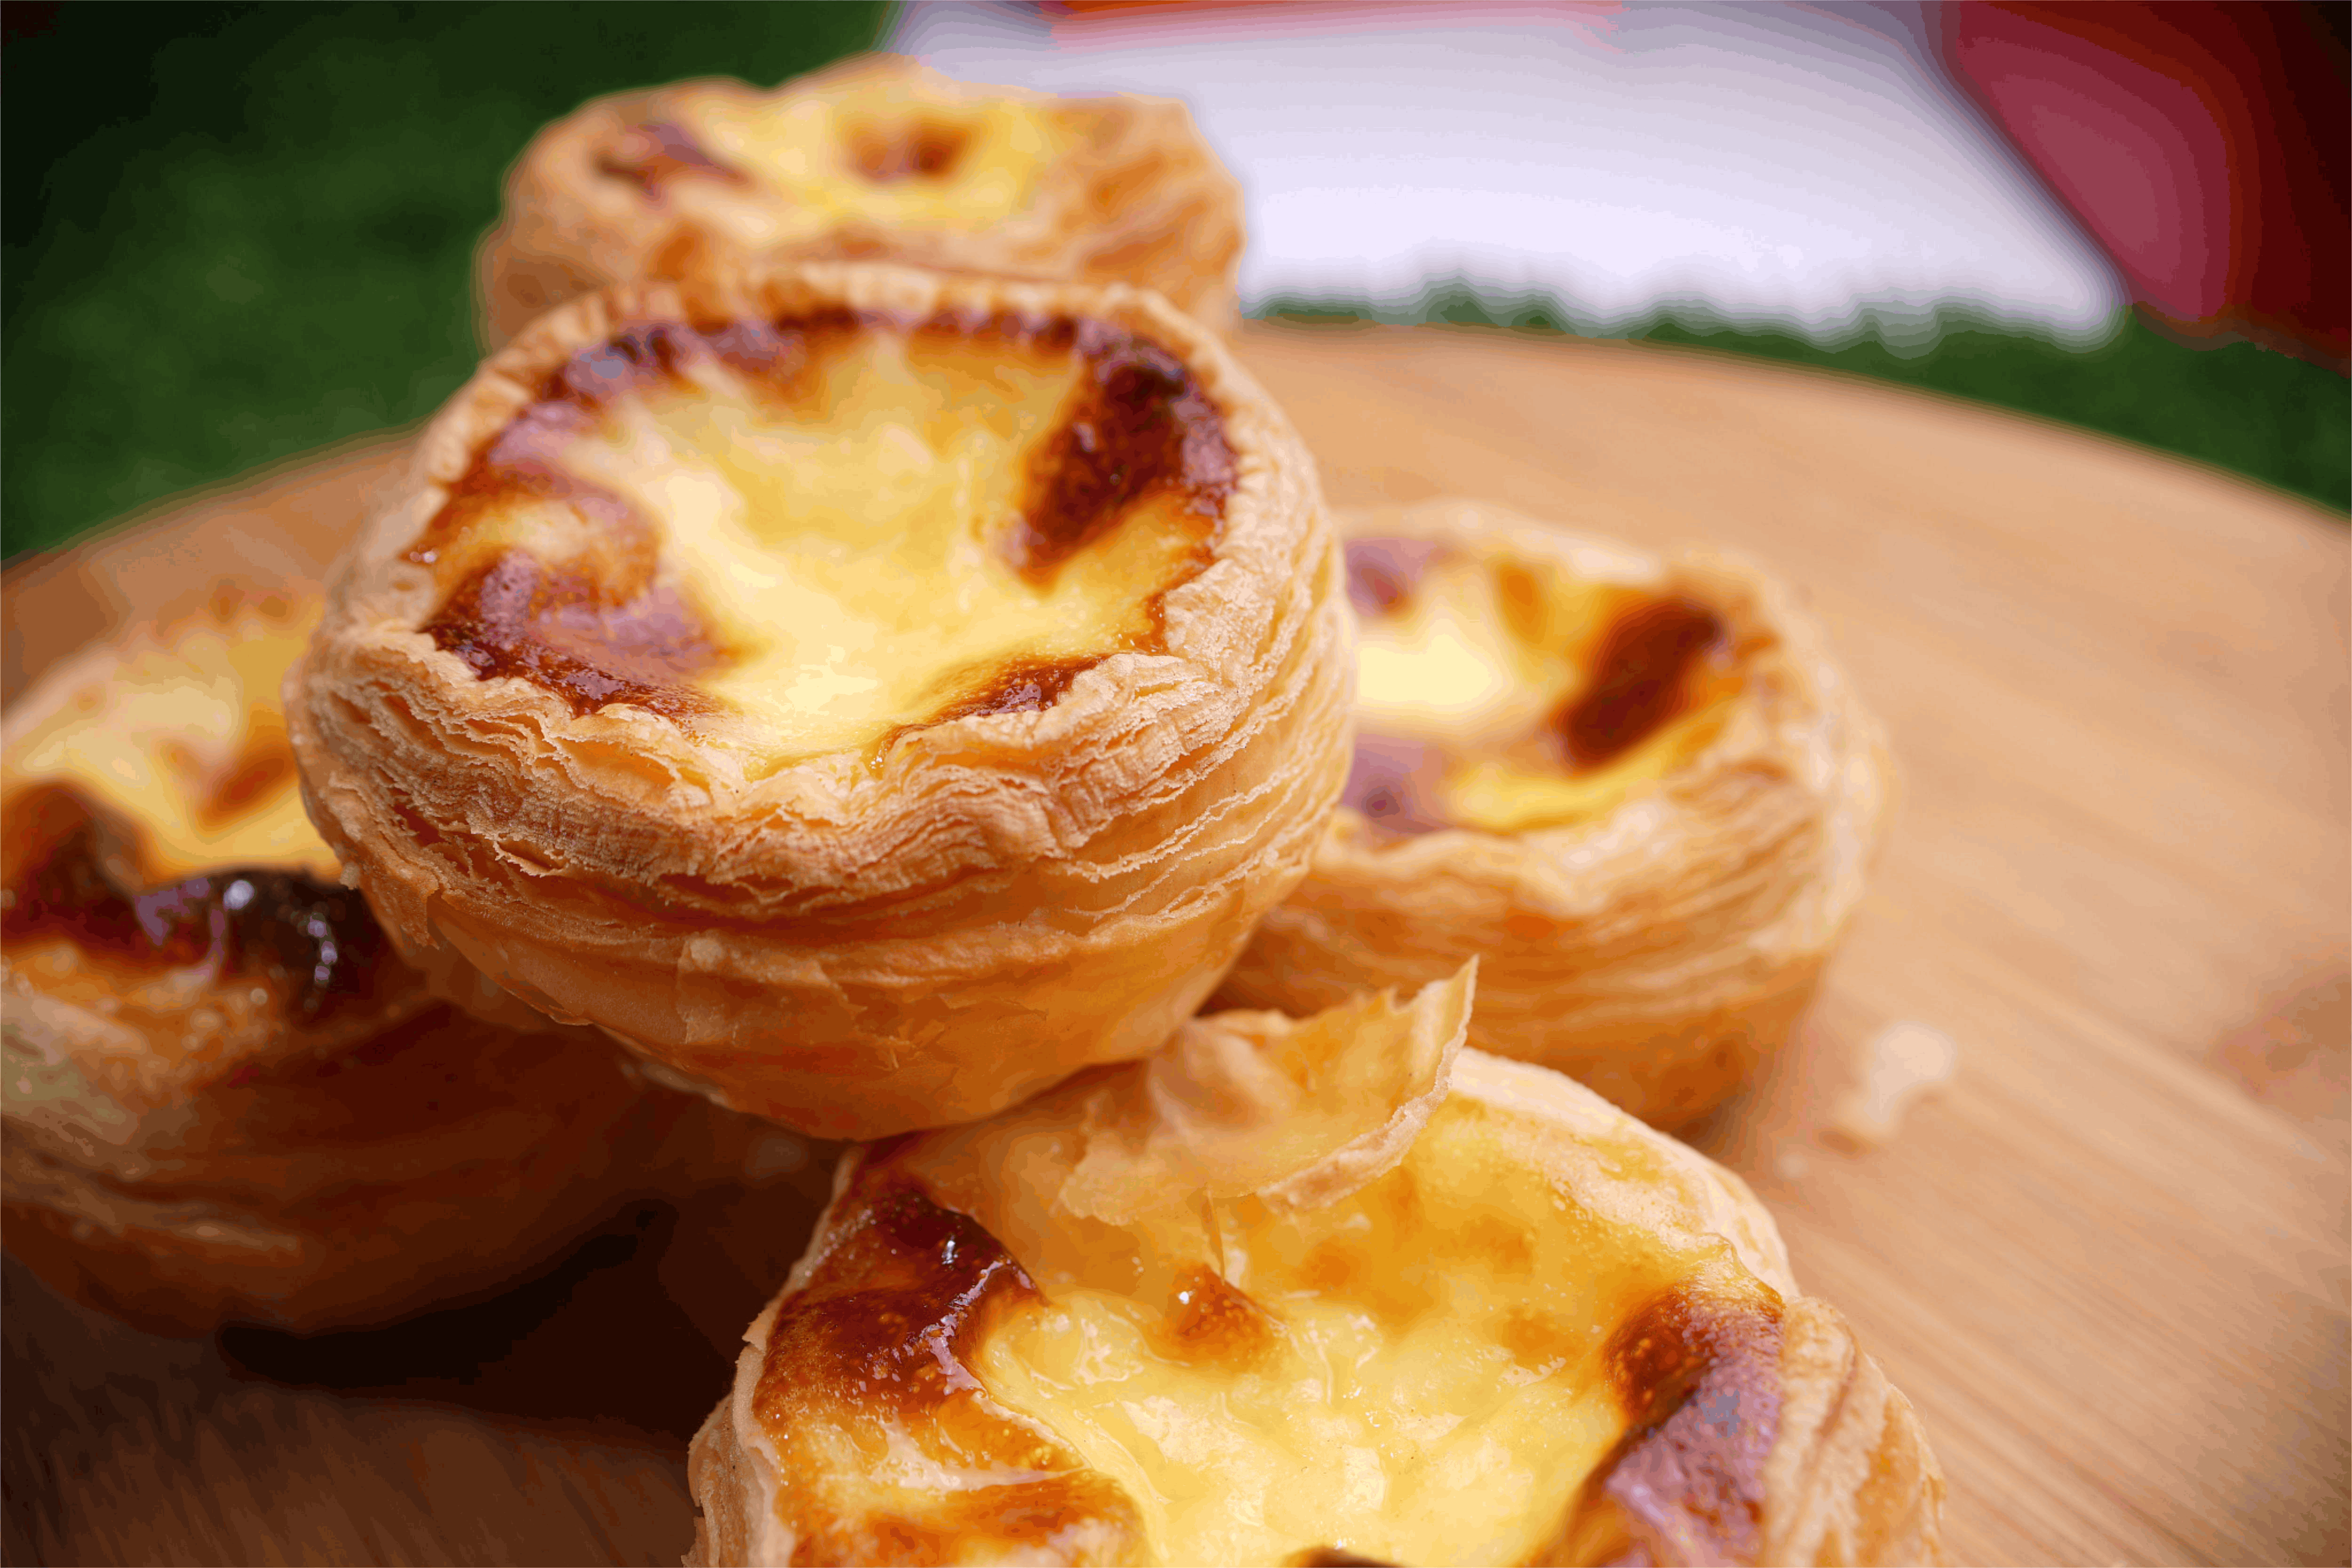 With the X&E air fryer, you can create delectable egg tarts in the comfort of your own home.